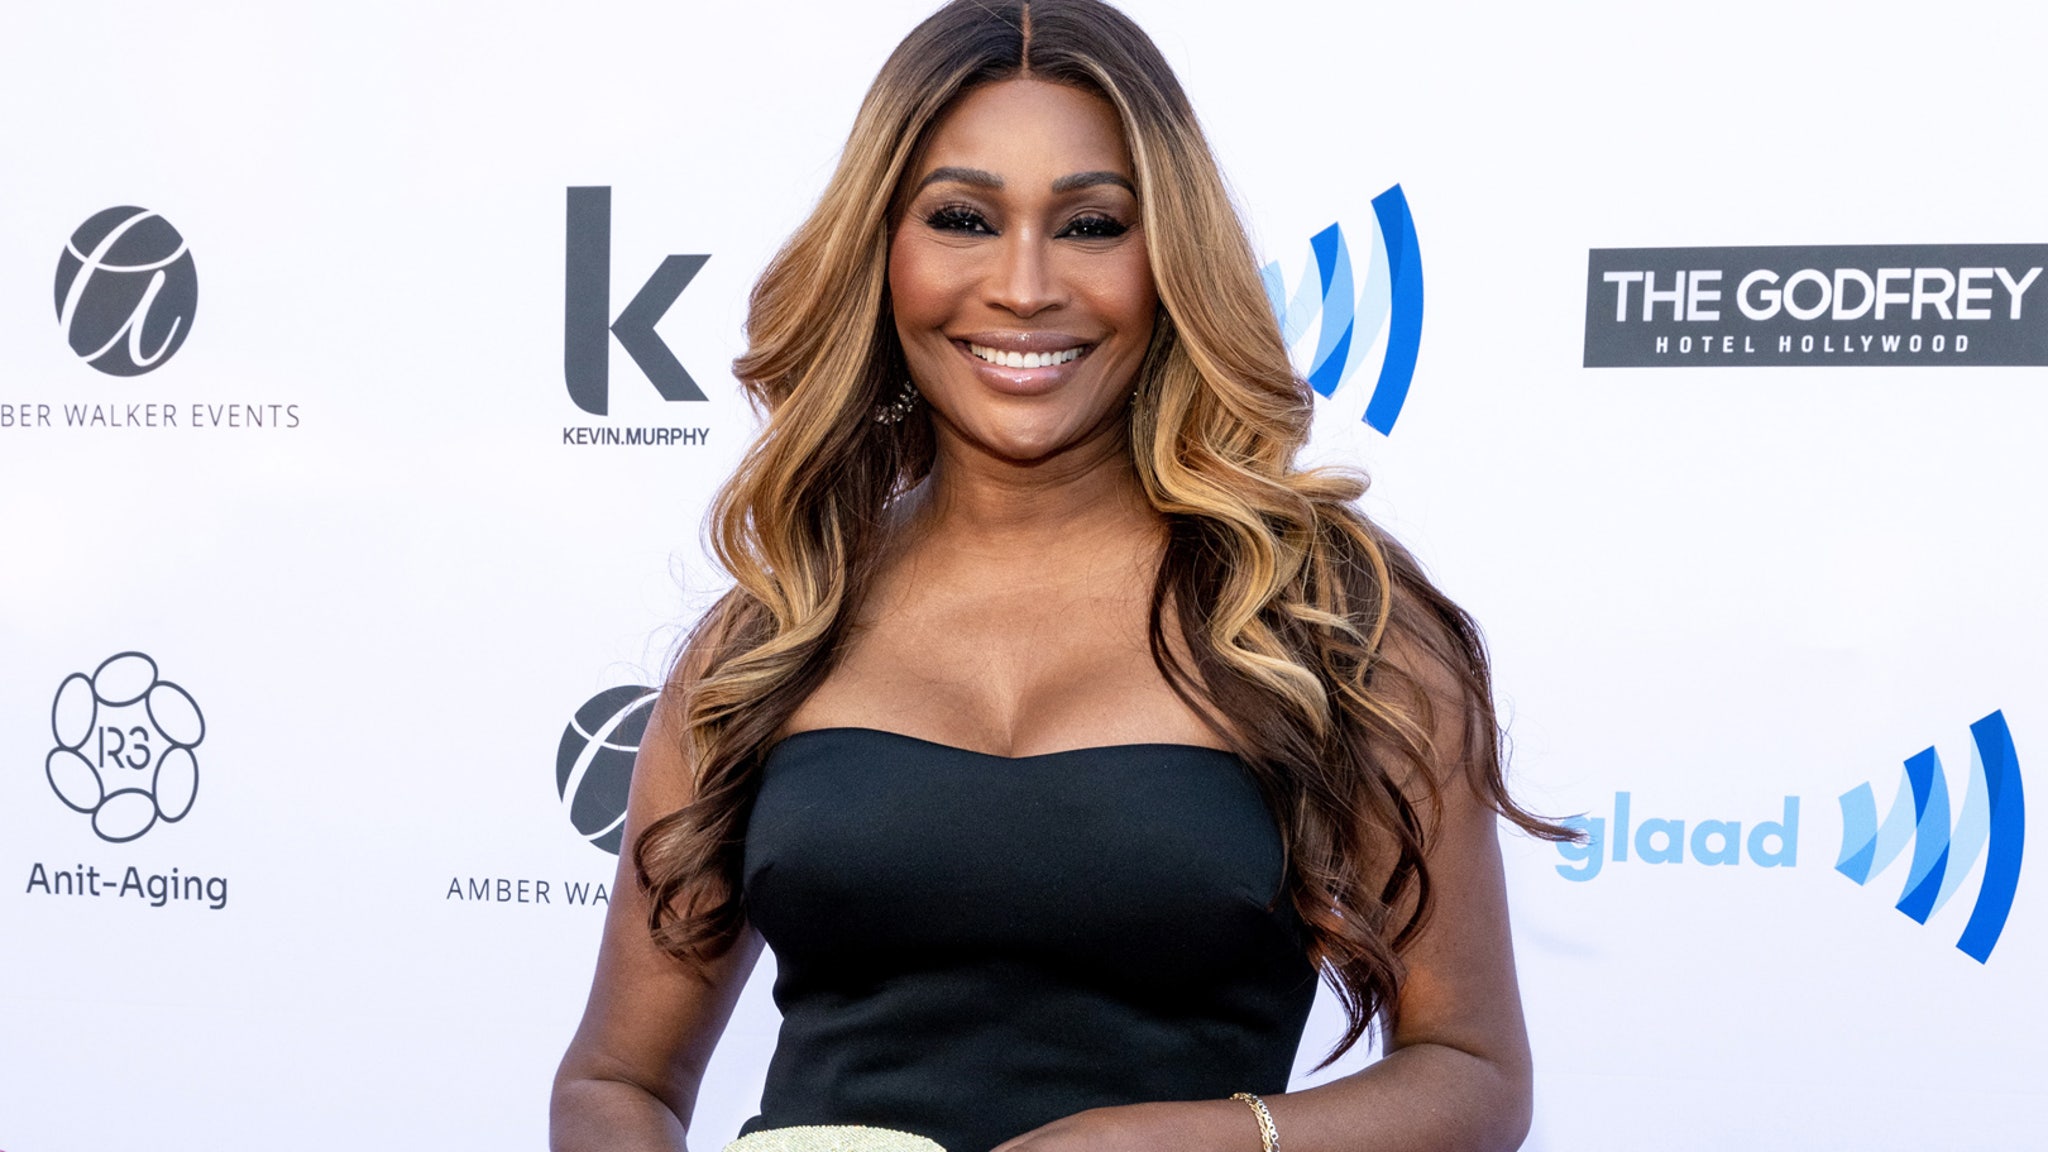 Cynthia Bailey Says RHOA Fans Are ‘In for a Treat’ with ‘Feisty’ New Cast, Explains Why She Returned (Exclusive) [Video]